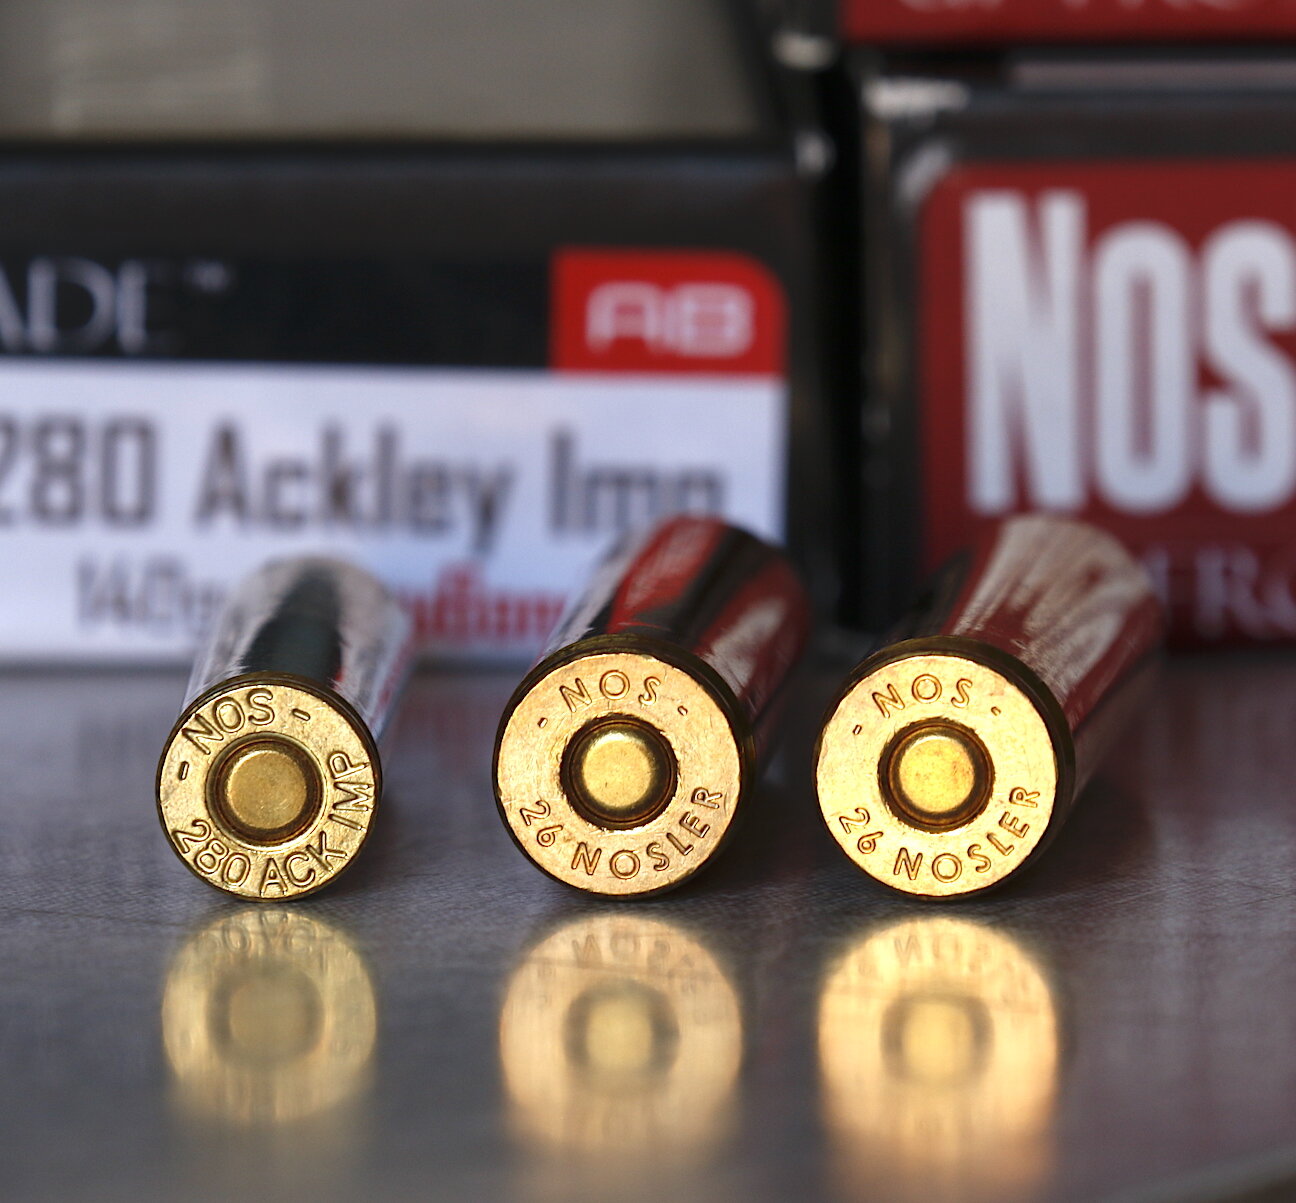 Hunting Bullets Explained  Bulls, Bullets, and Ballistics With NOSLER 